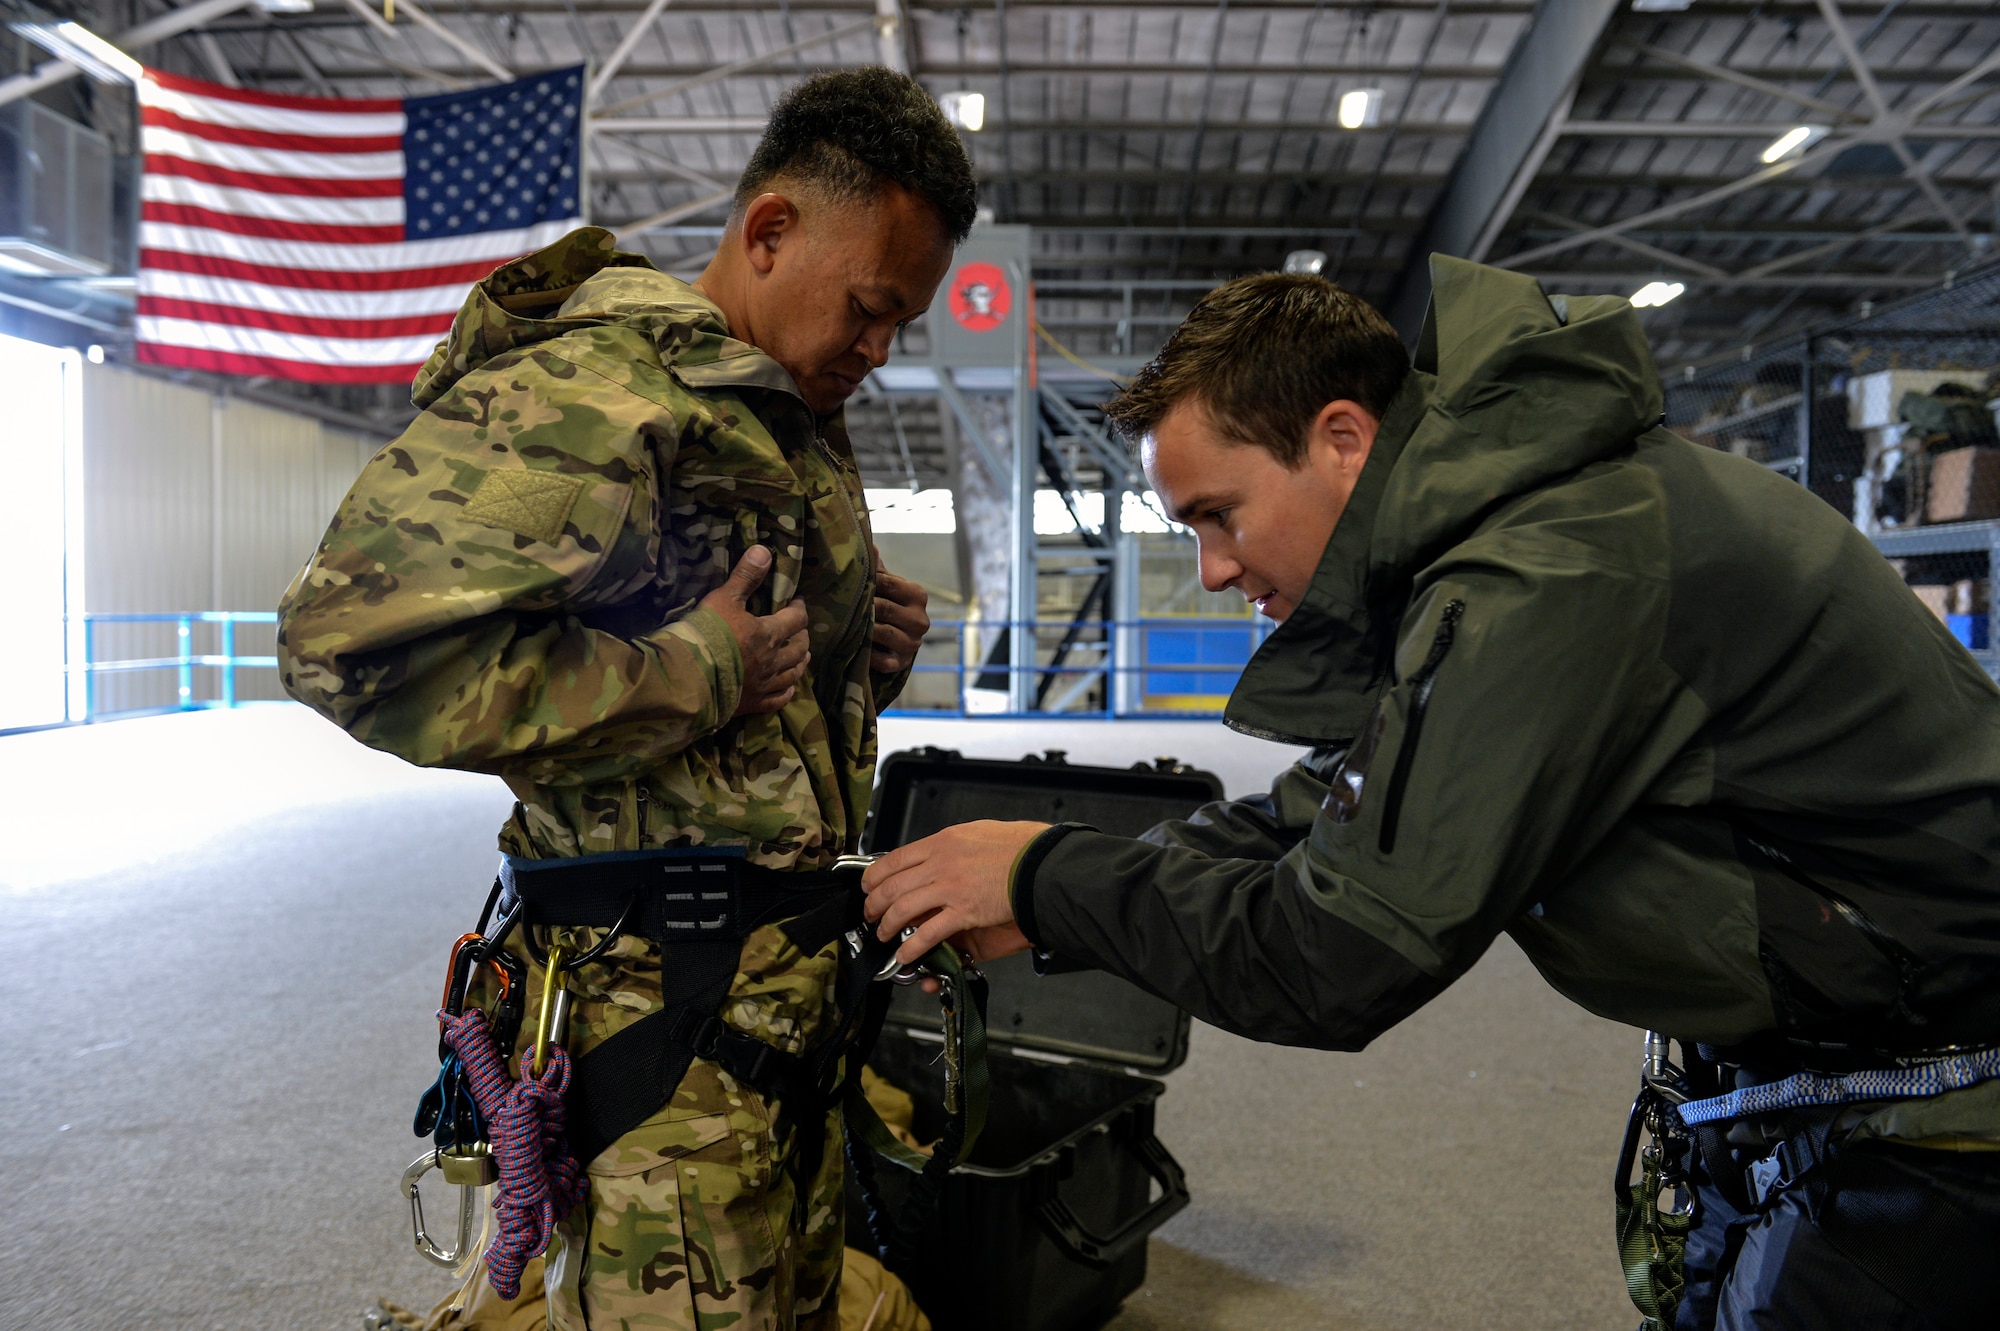 2nd Lt. Ryan McQuillan (right), 22nd Special Tactics Squadron officer in charge weapons and tactics, performs a buddy check for the climbing equipment of Master Sgt. Kim Brewer (left), 22nd STS NCO in charge of weapons and tactics June 4, 2014, at Joint Base Lewis-McChord, Wash. Due to their hoist operations and climbing experience, McQuillan and Brewer were called to evacuate a patient from Disappointment Cleaver on Mount Rainier. (U.S. Air Force photo/Staff Sgt. Russ Jackson)